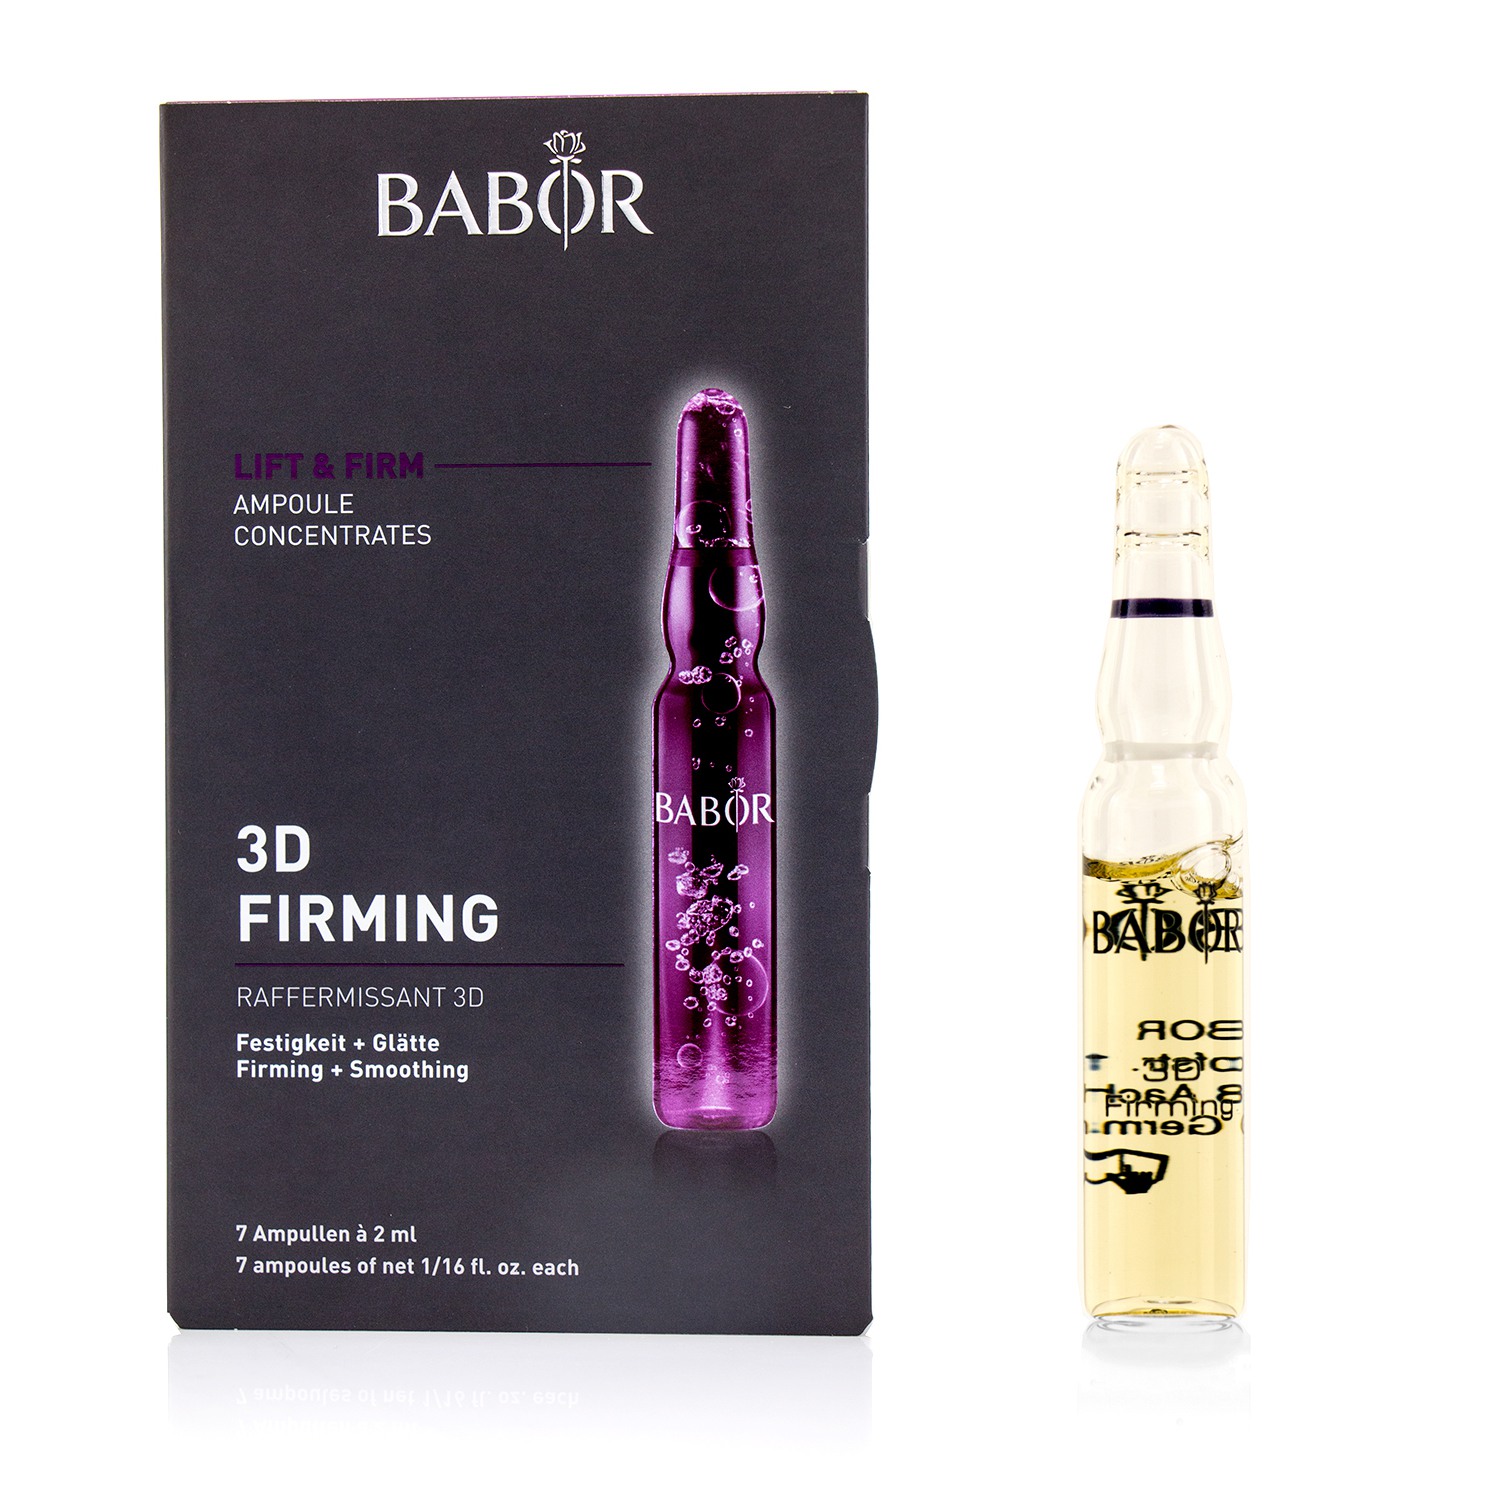 Ampoule Concentrates Lift & Firm 3D Firming Babor Image